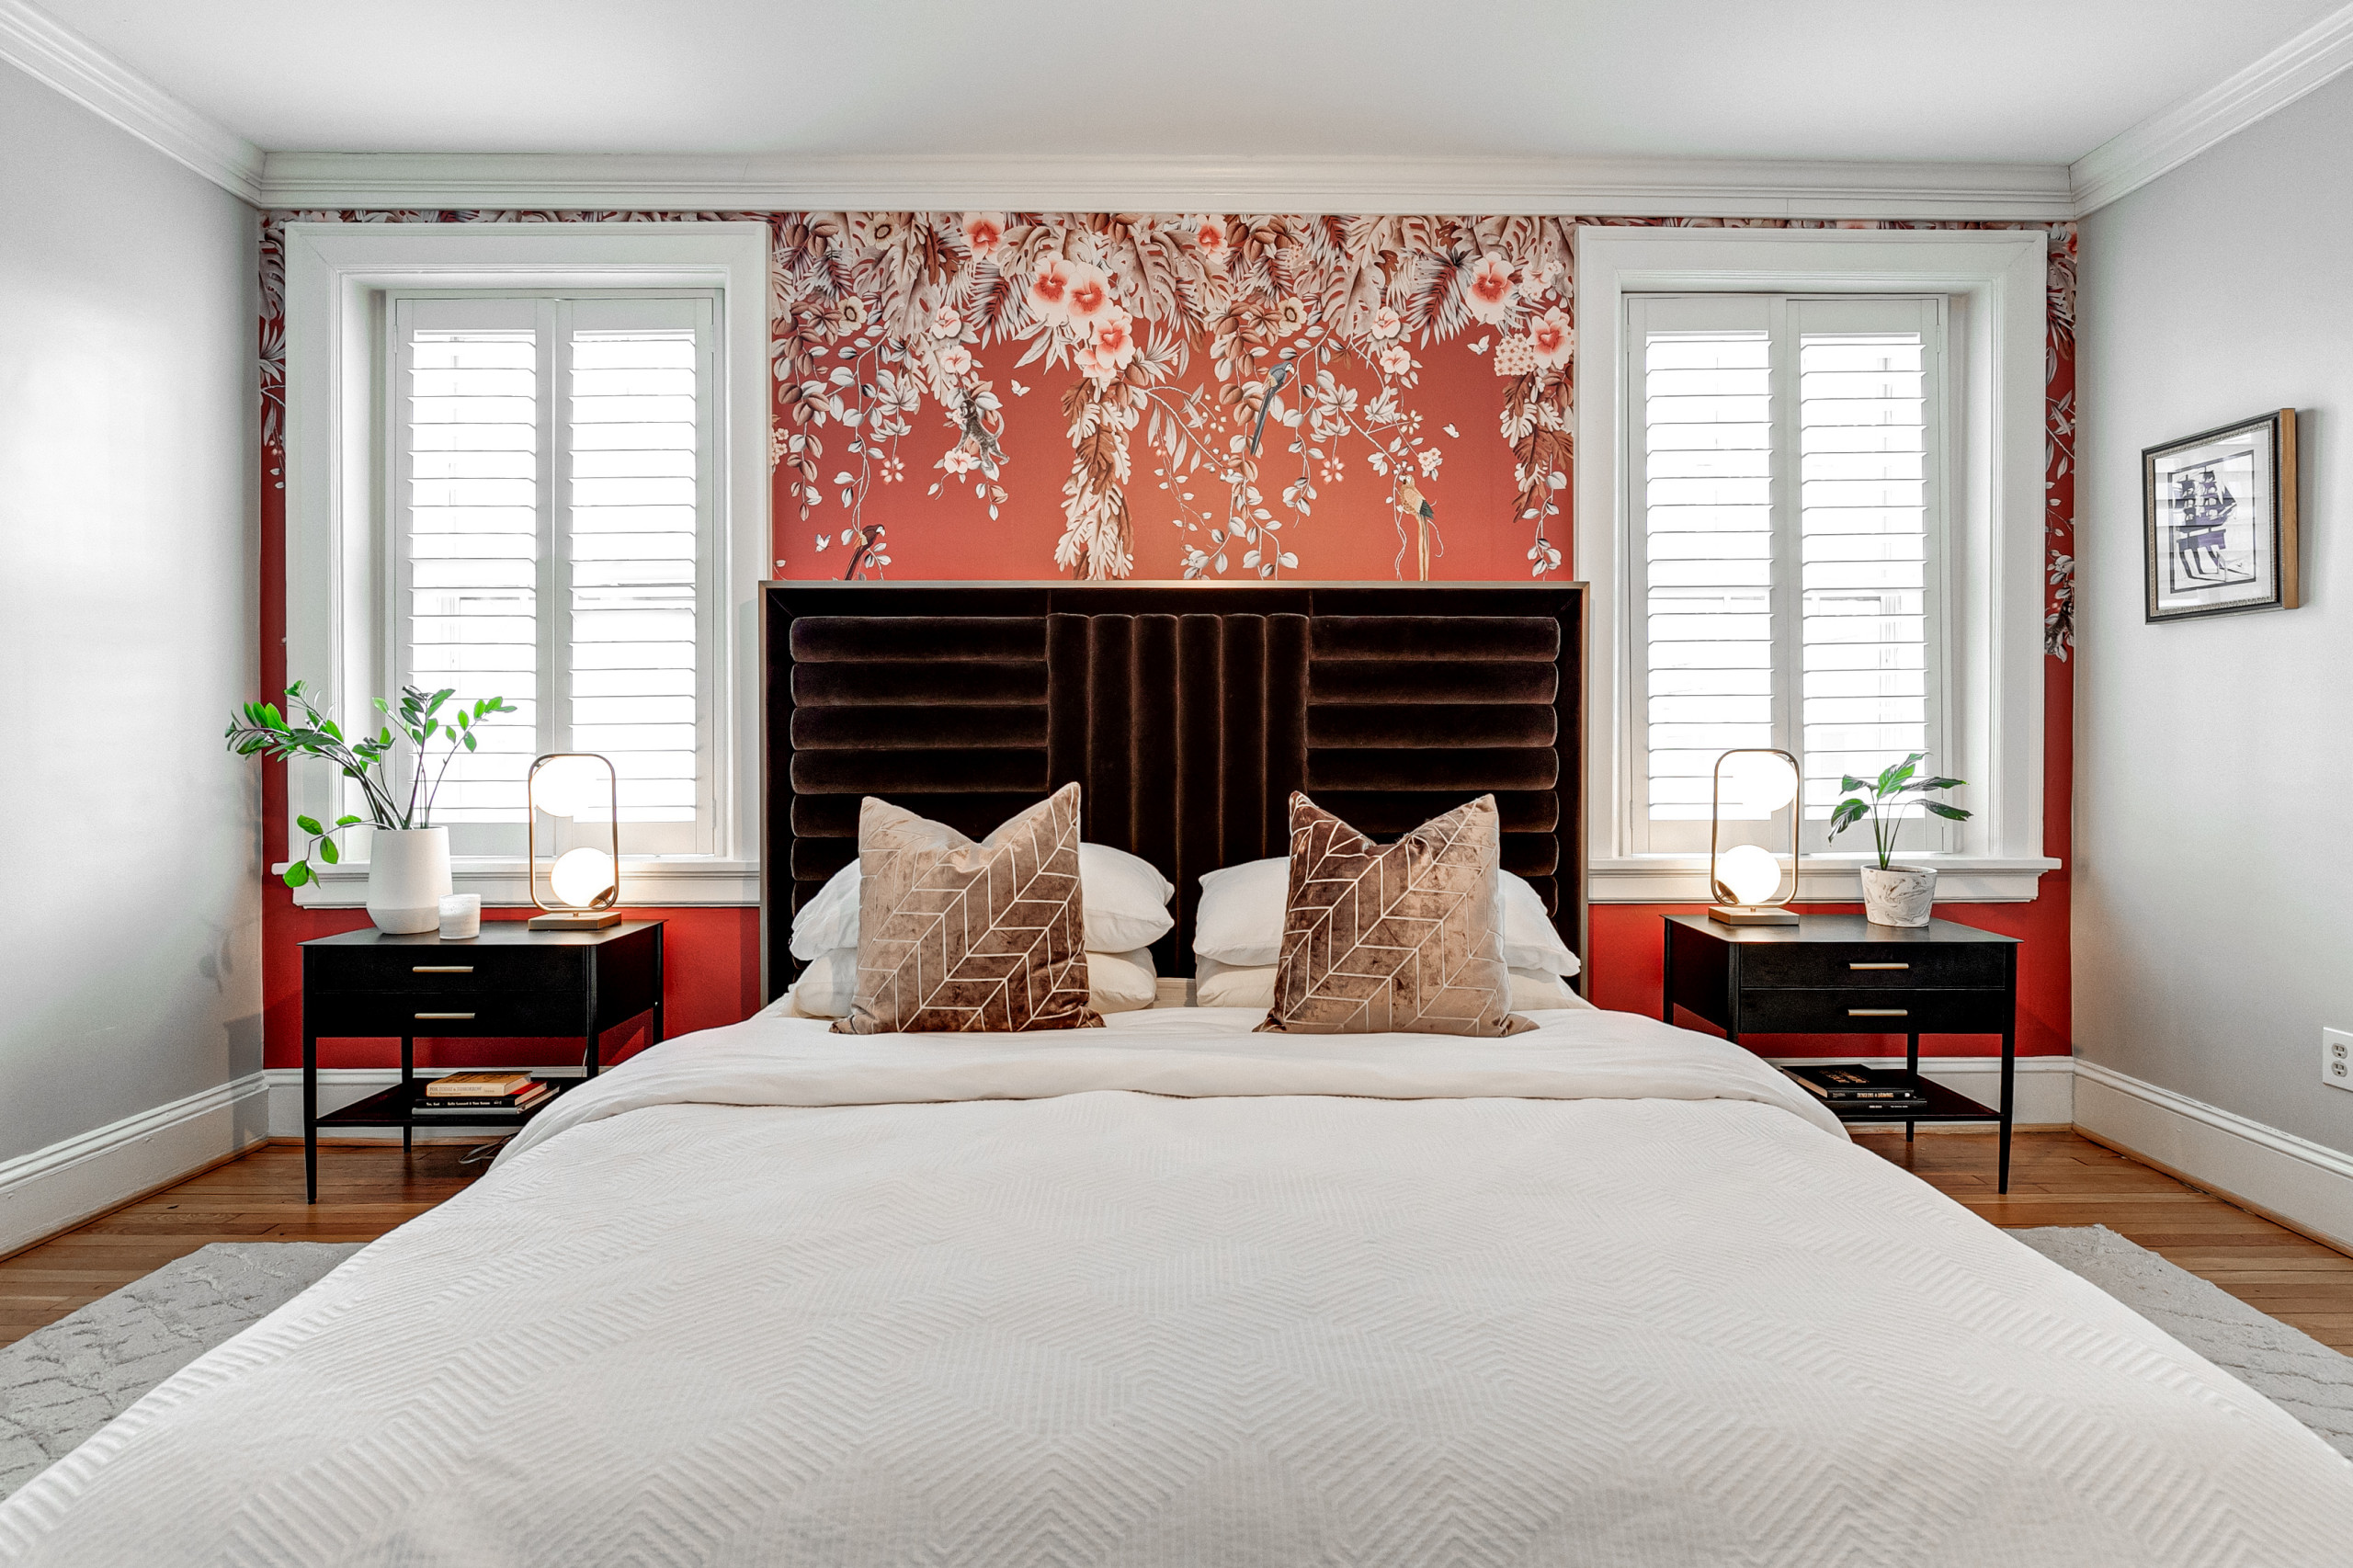 75 Beautiful Bedroom Pictures Ideas March 21 Houzz